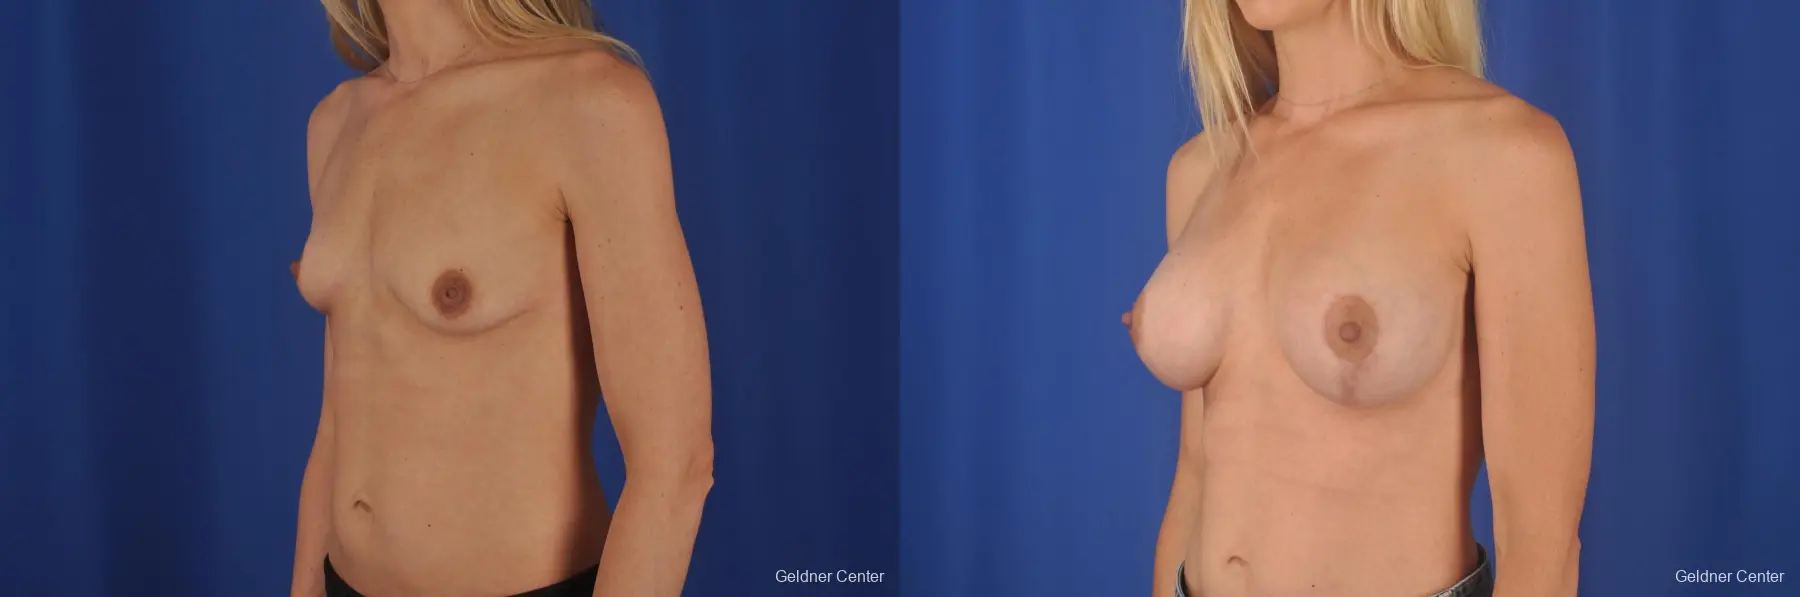 Breast Lift Lake Shore Dr, Chicago 6654 - Before and After 4